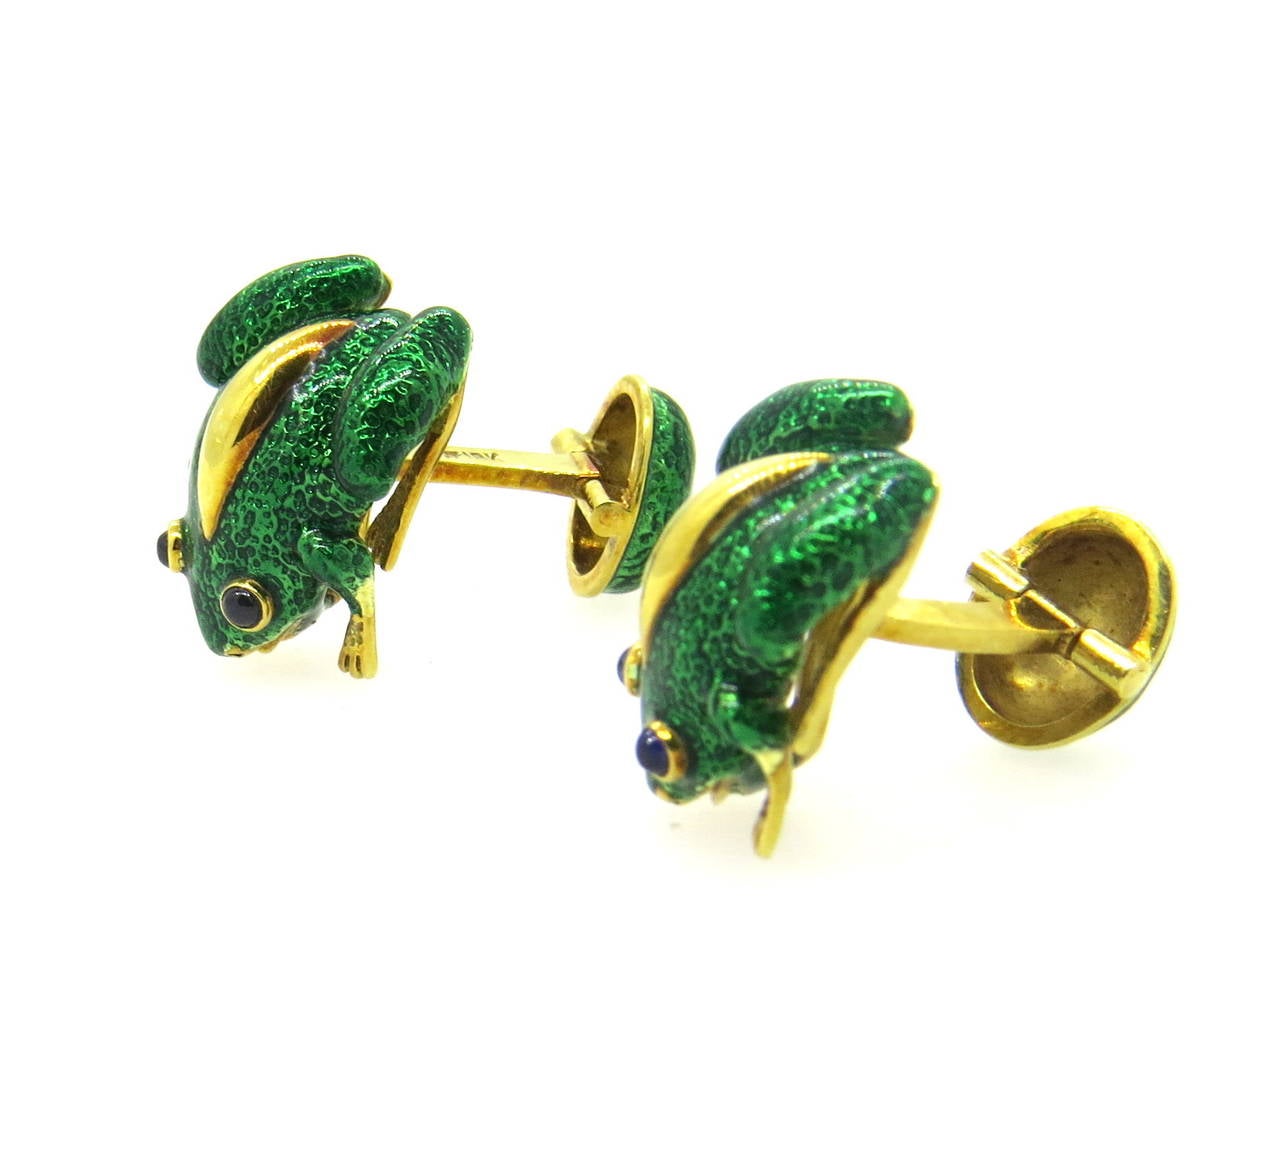 18k gold cufflinks, featuring frogs, decorated with sapphire cabochon eyes and green enamel tops. Measuring 20mm x 18mm. Weight - 19.6 grams